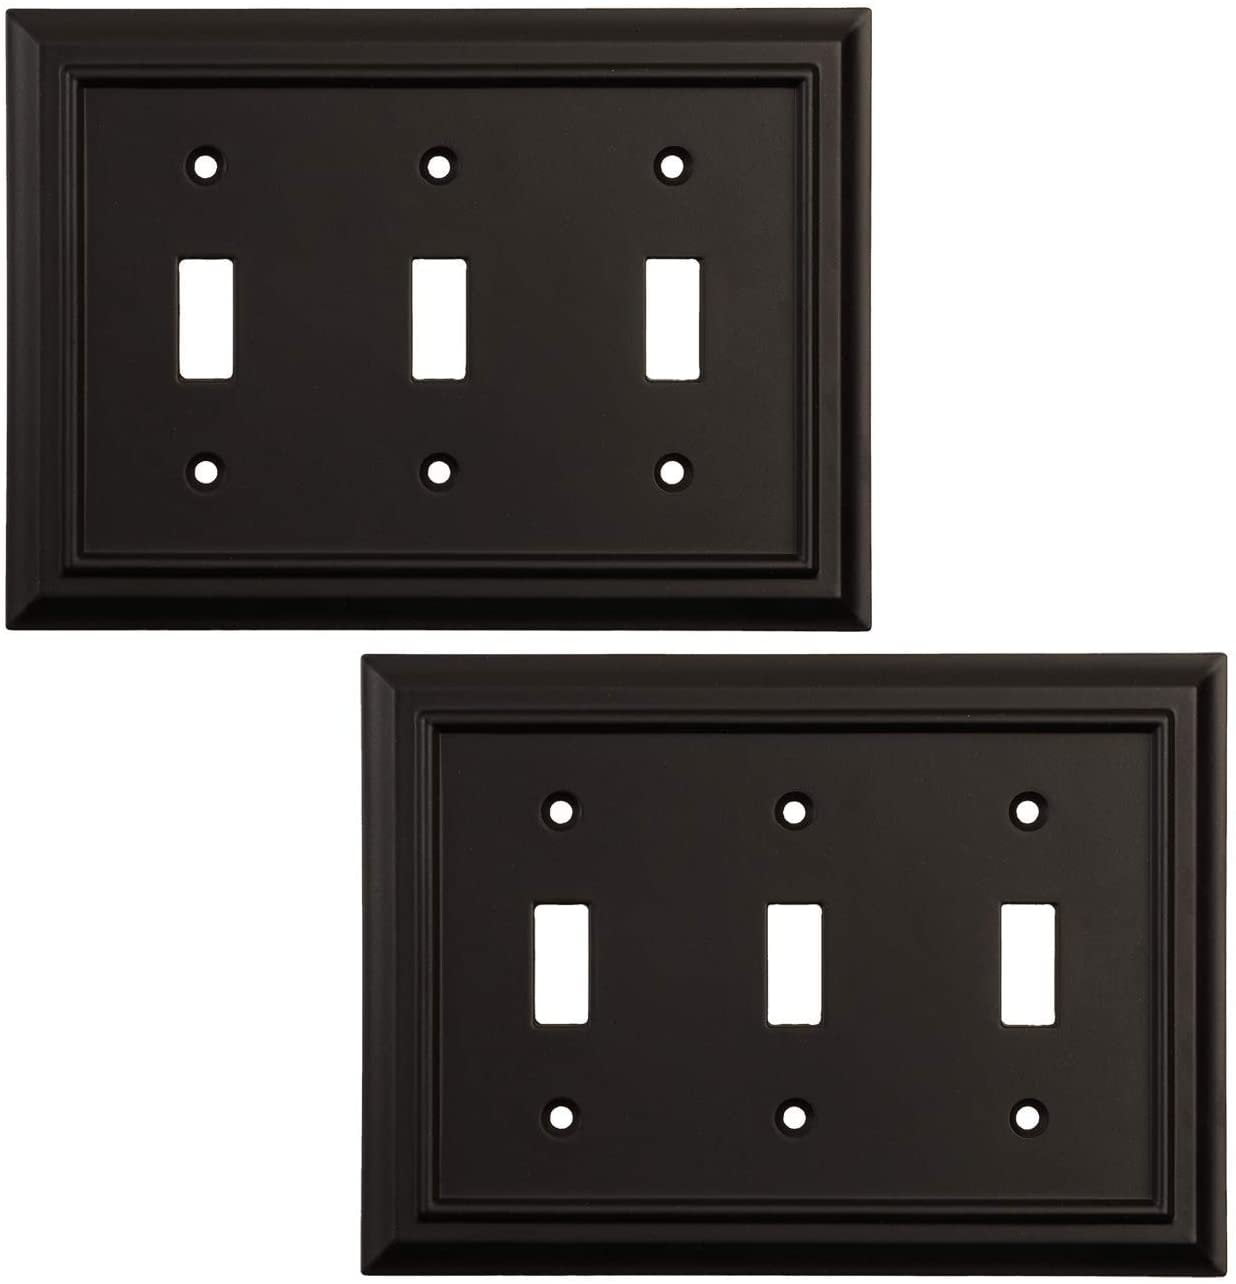 Gray & White Cross Hatch Art Plates 3-Gang Toggle OVERSIZED Switch Plate/OVER SIZE Wall Plate